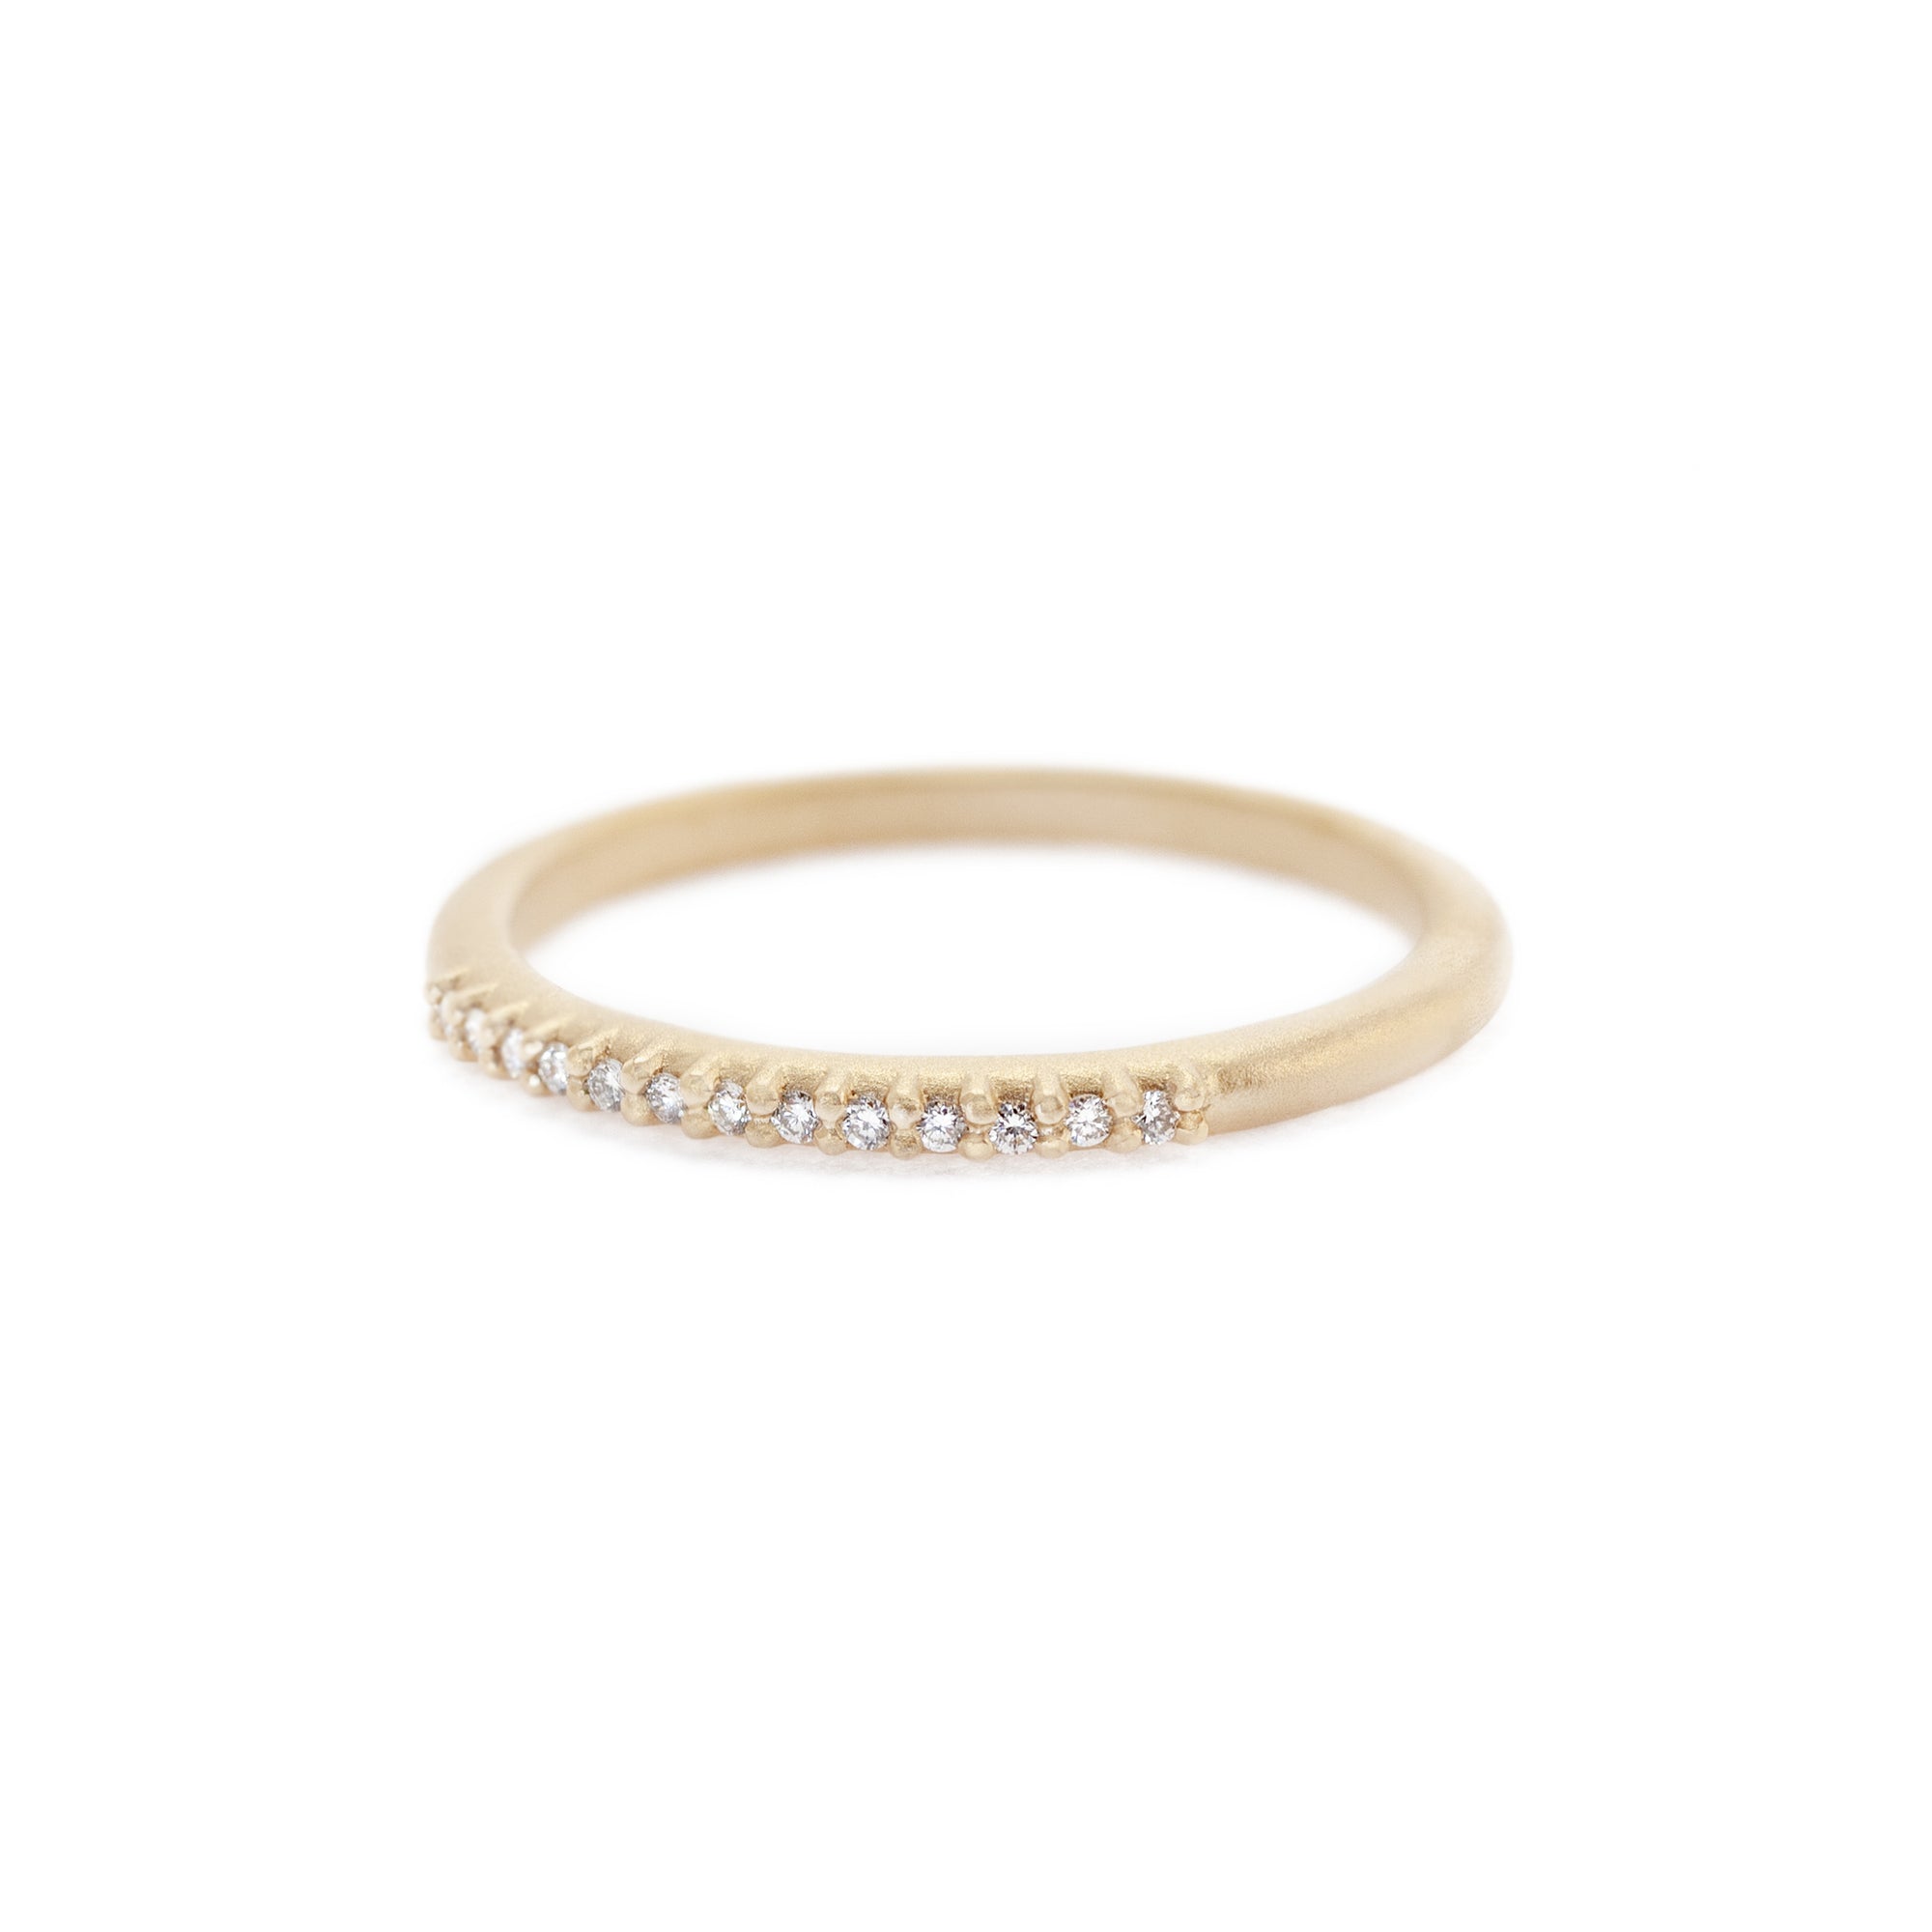 Handmade classic wedding band with pave set diamonds in 18K yellow gold. Perfect stacking band by Designer Megan Thorne